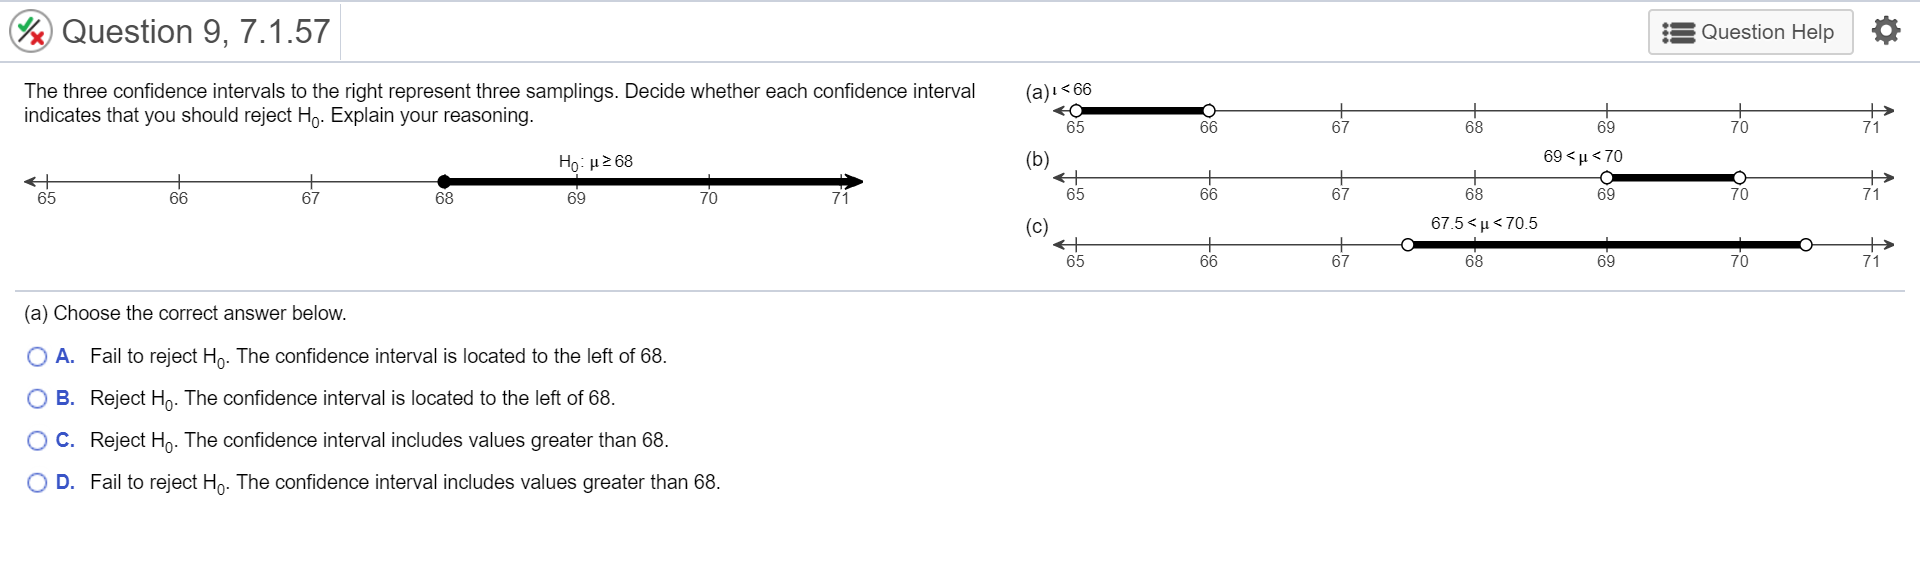 Question 9, 7.1.57
Question Help
The three confidence intervals to the right represent three samplings. Decide whether each confidence interval
(a)i<66
indicates that you should reject Ho. Explain your reasoning.
65
66
68
69
70
71
Họ: H2 68
(b)
69 <µ < 70
65
66
67
68
69
65
66
67
68
69
70
71
(c)
67.5 < μ< 70.5
65
66
67
68
69
71
(a) Choose the correct answer below.
O A. Fail to reject Hn. The confidence interval is located to the left of 68.
B. Reject Ho. The confidence interval is located to the left of 68.
OC. Reject Ho. The confidence interval includes values greater than 68.
O D. Fail to reject Ho. The confidence interval includes values greater than 68.
